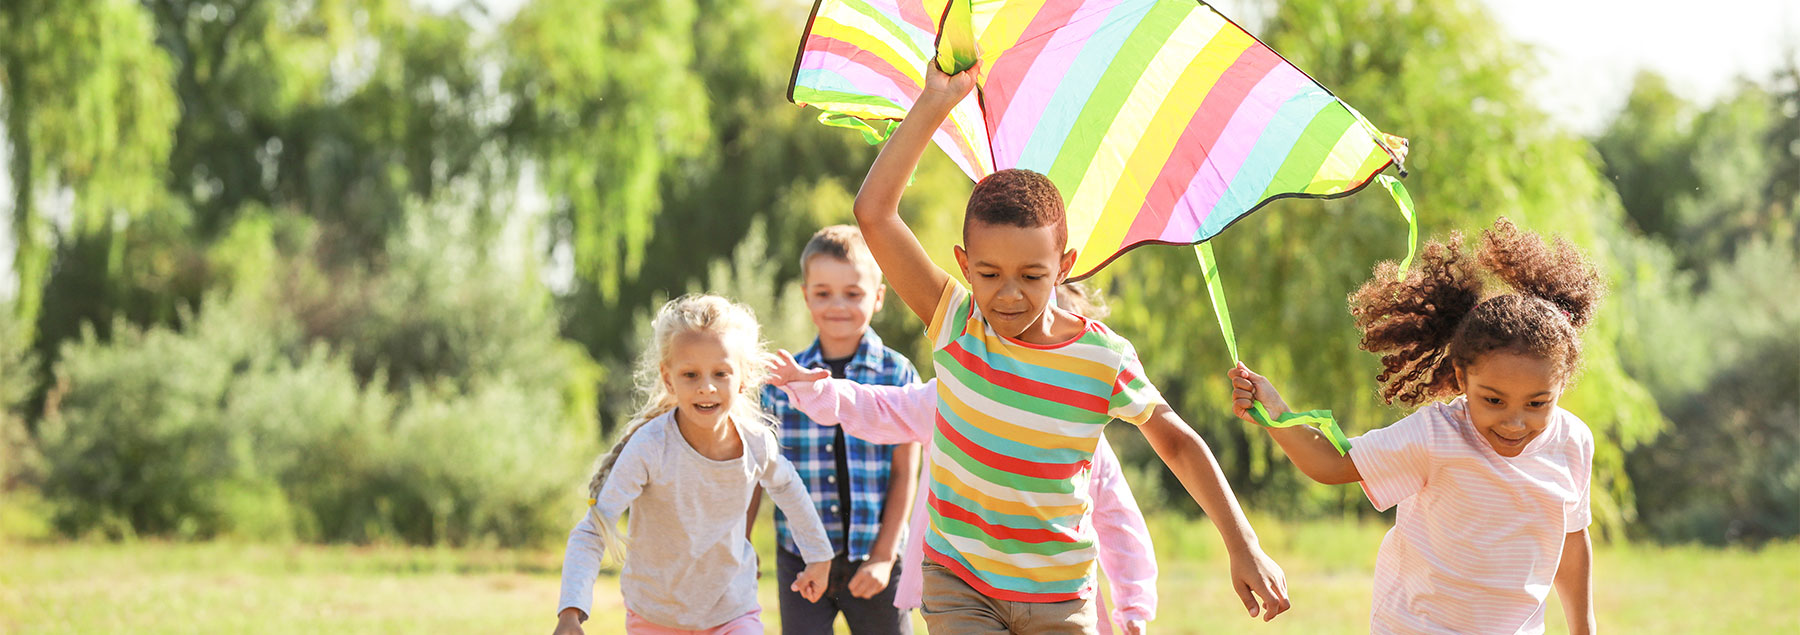 Group of kids running with a rainbow kite